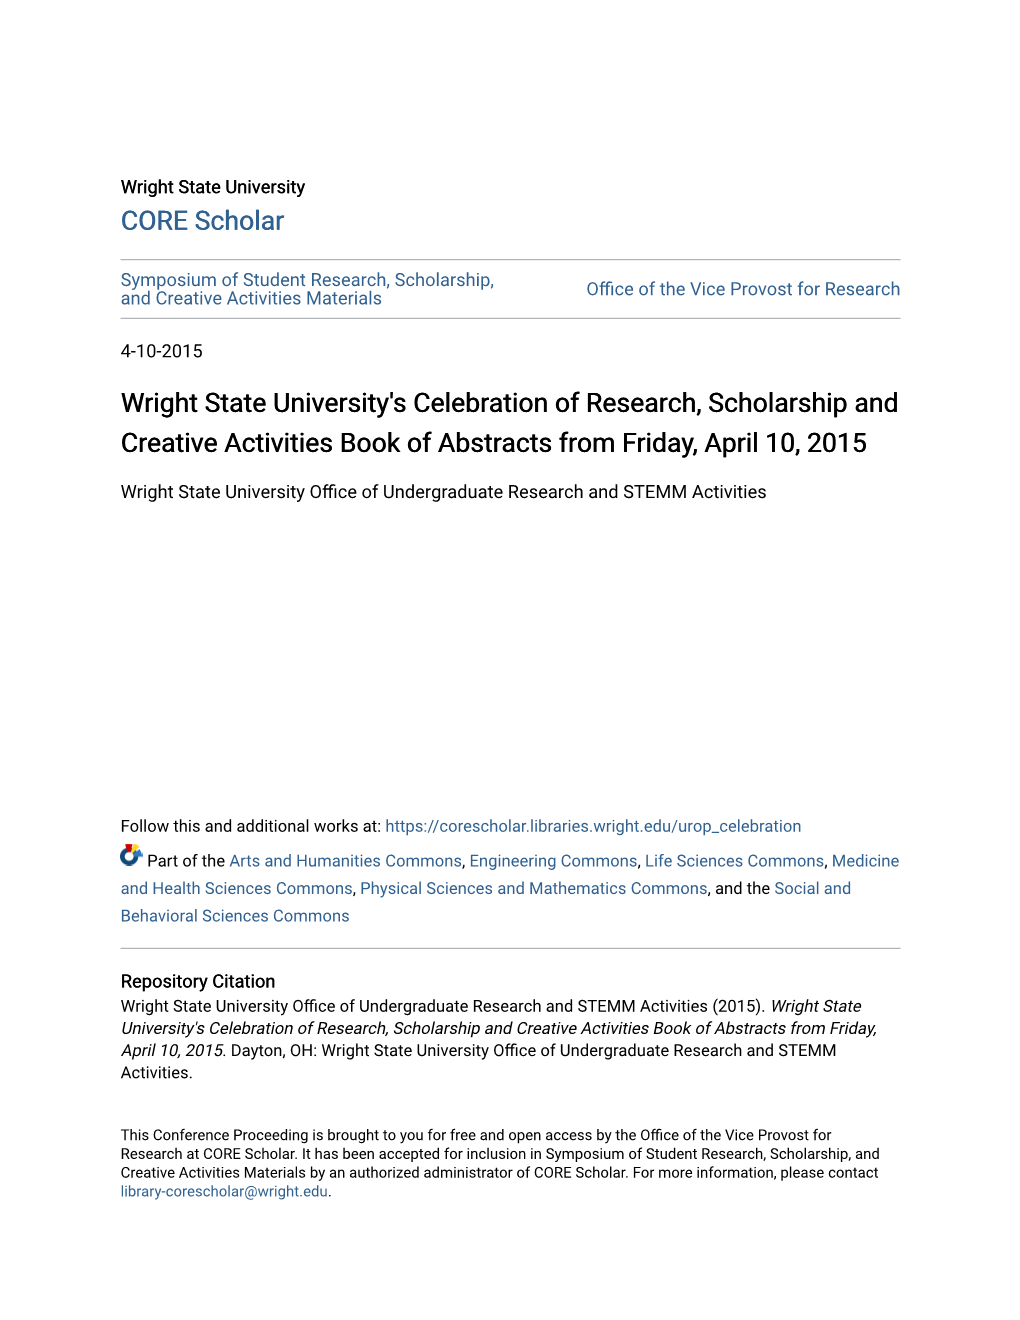 Wright State University's Celebration of Research, Scholarship and Creative Activities Book of Abstracts from Friday, April 10, 2015